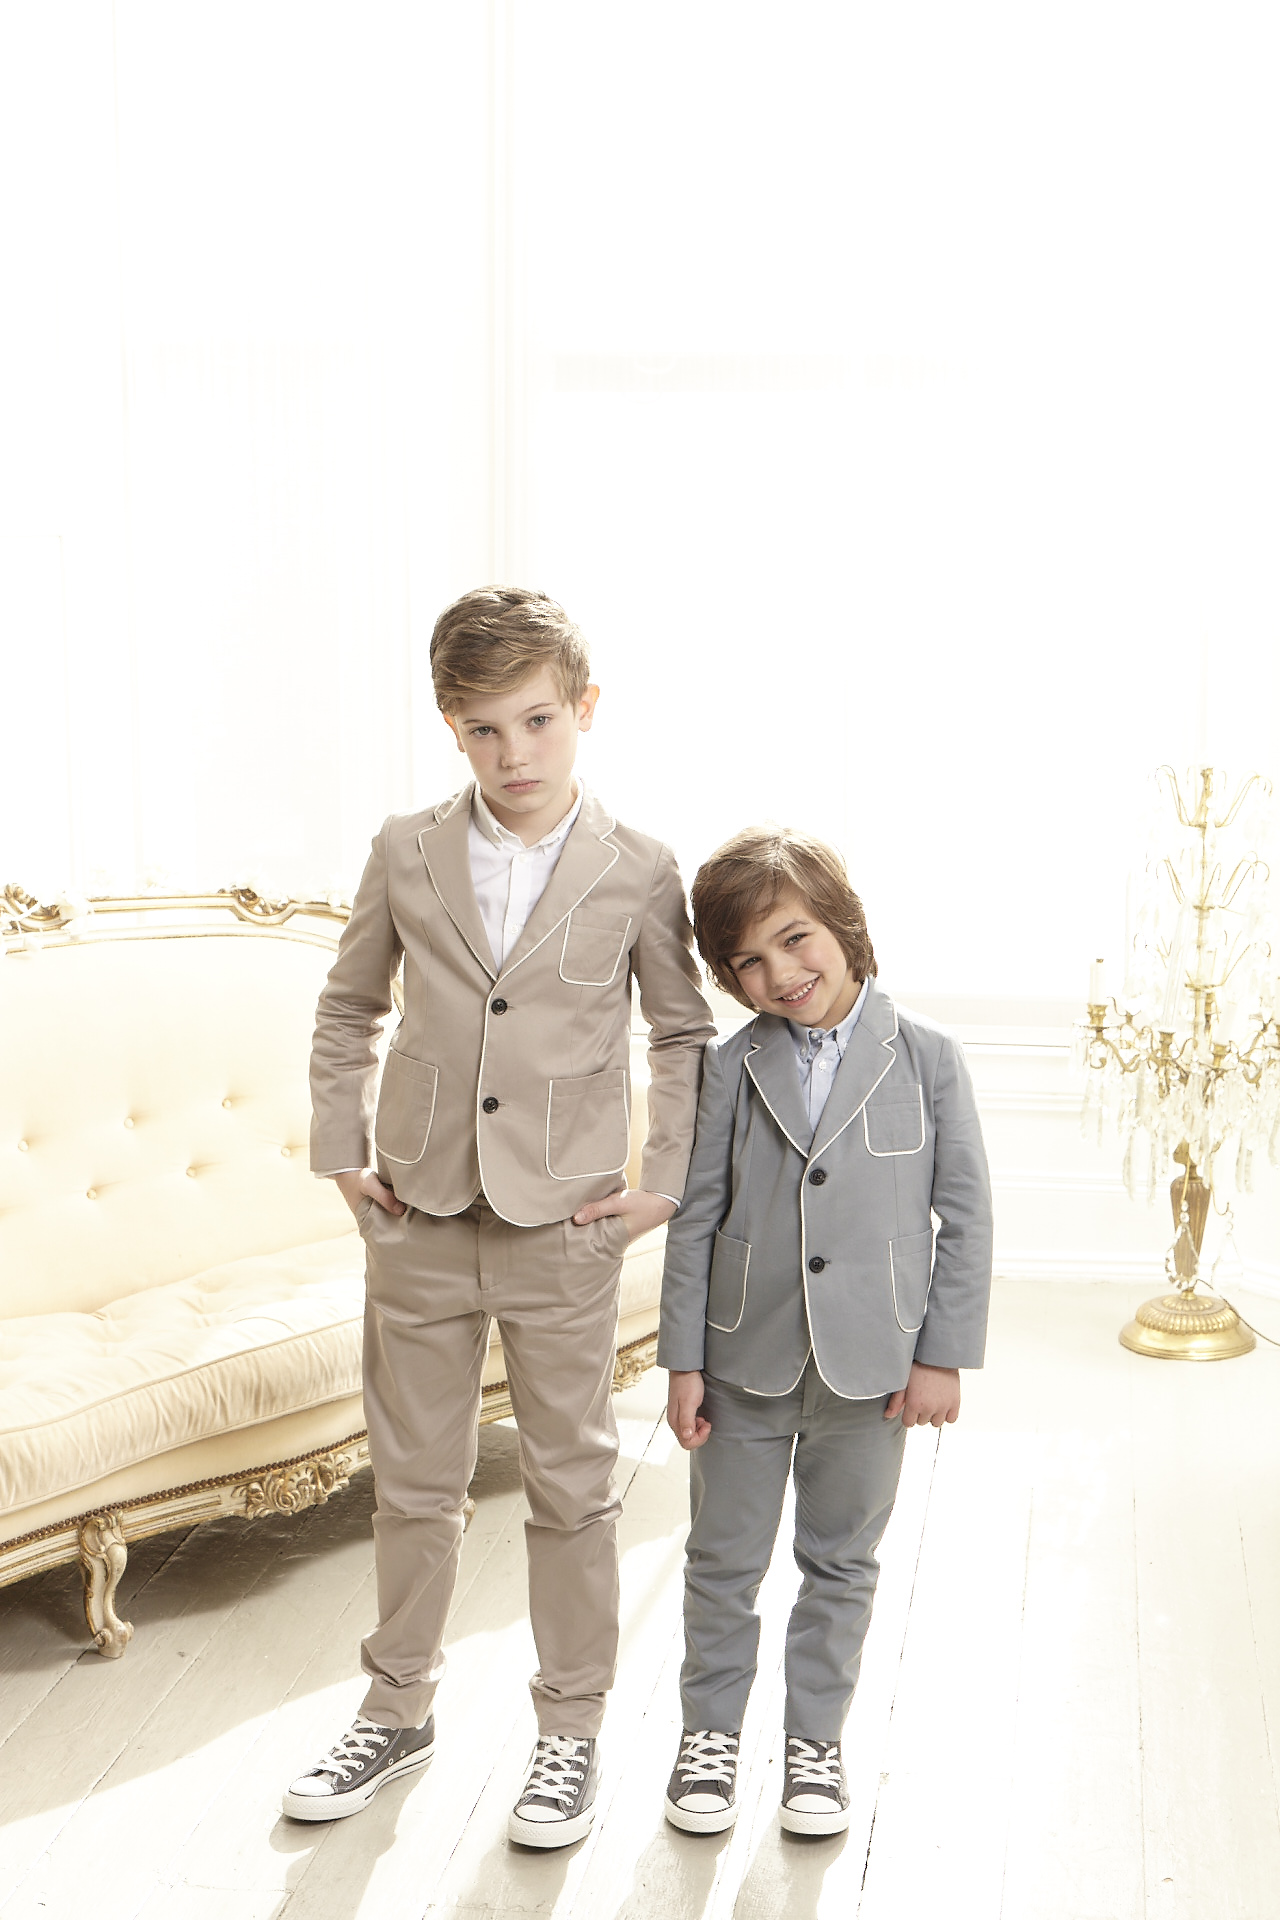 PHOTO: Tailored jackets and button downs fit boys up to 8 years at Marie-Chantal Children.